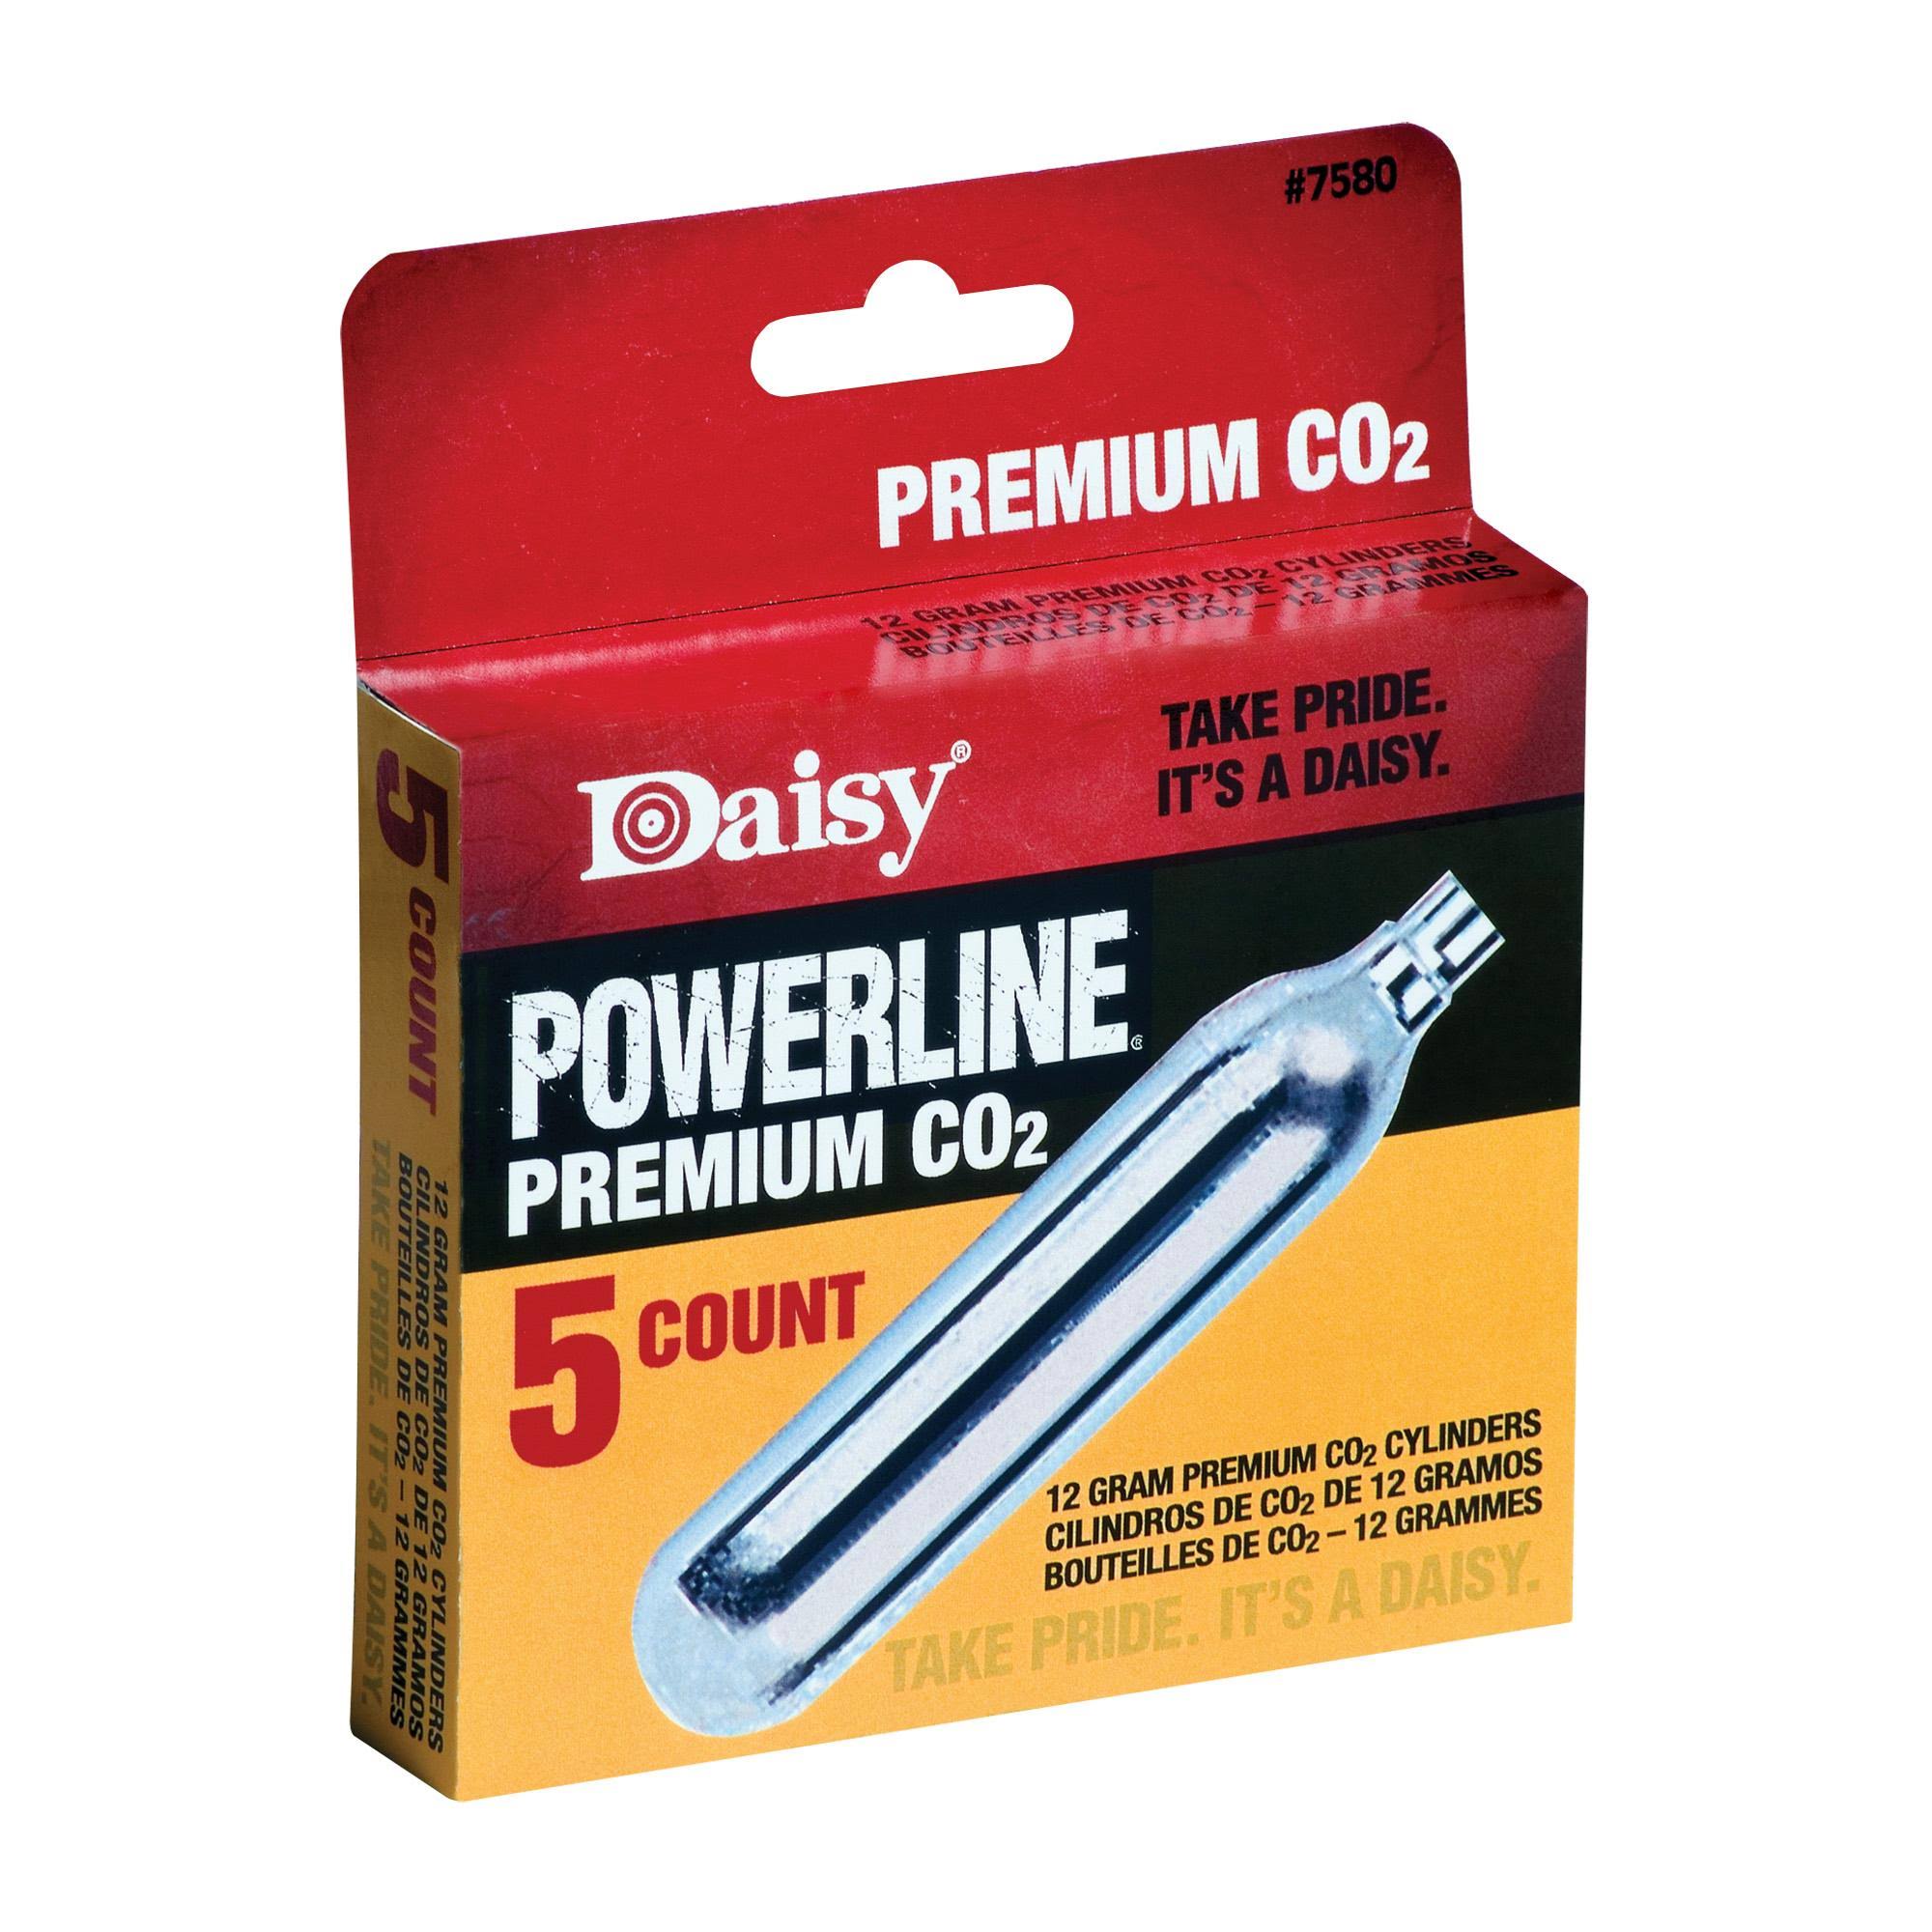 Daisy Powerline Premium Co2 Cylinders - 5 Count, 12g